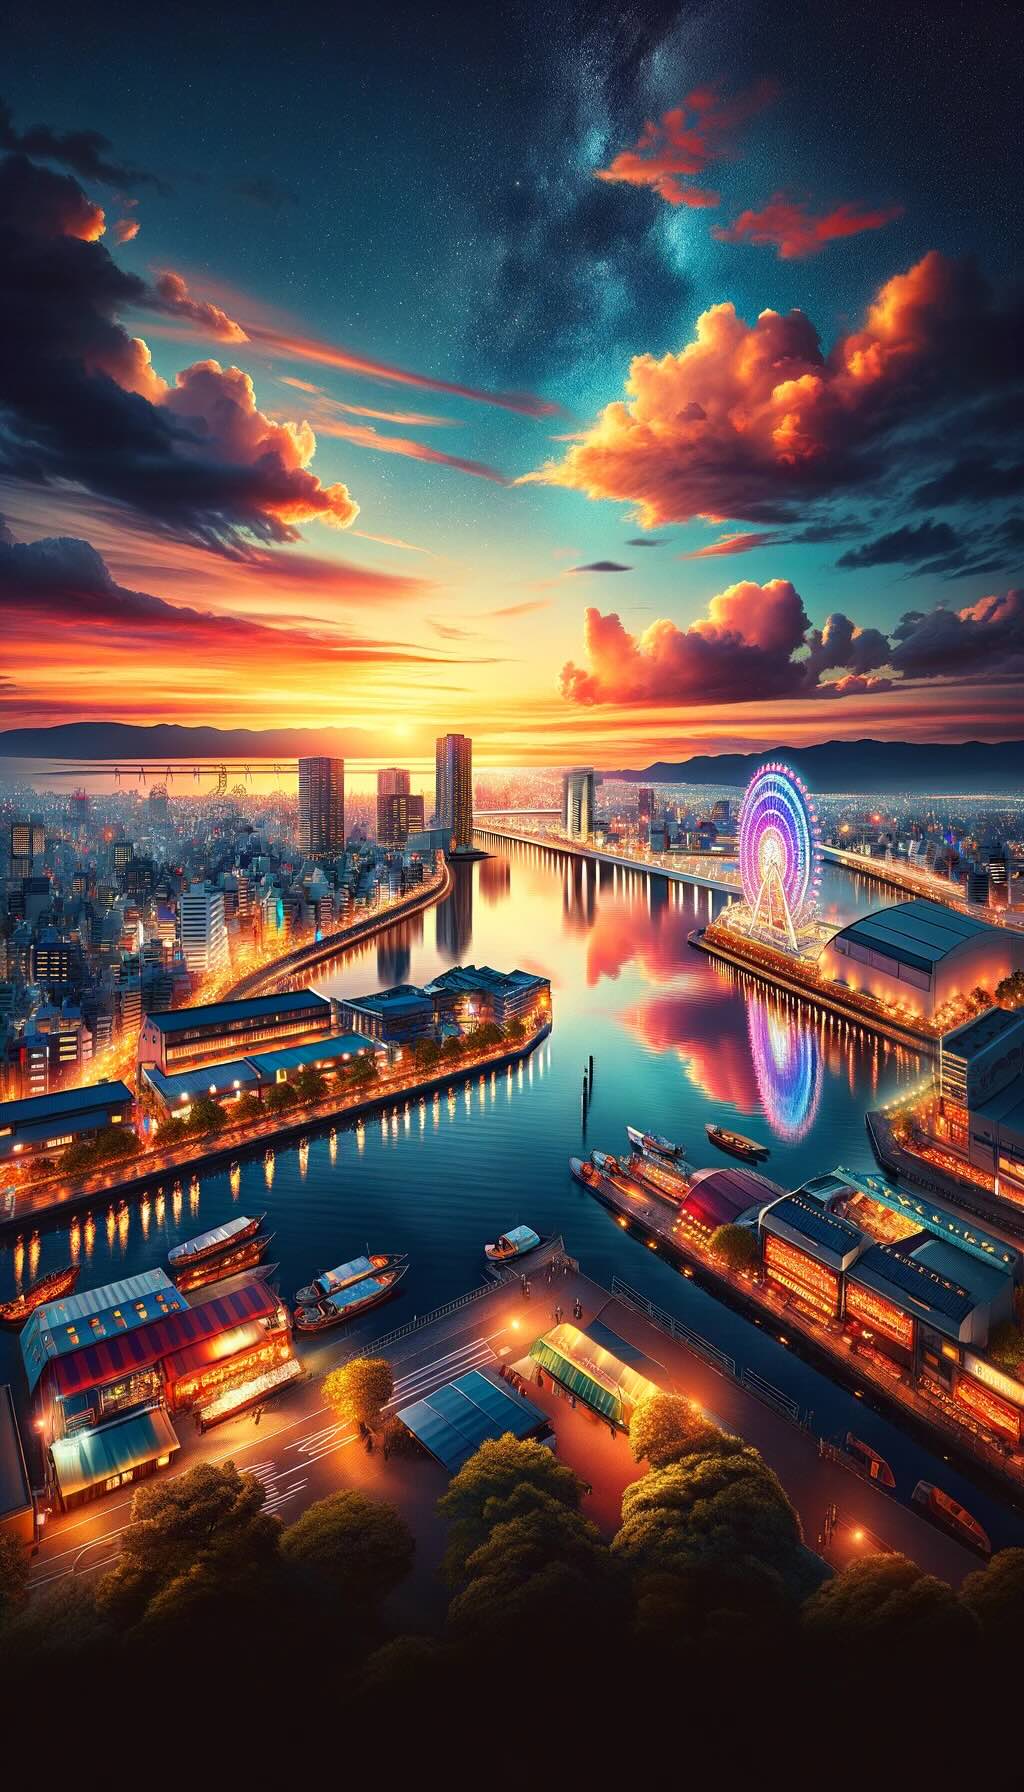 Osaka Bay in Japan scene beautifully captures the sprawling harbor at sunset, with the bay waters mirroring the colorful sky and the distant city skyline illuminated by twinkling lights and a moving Ferris wheel. 